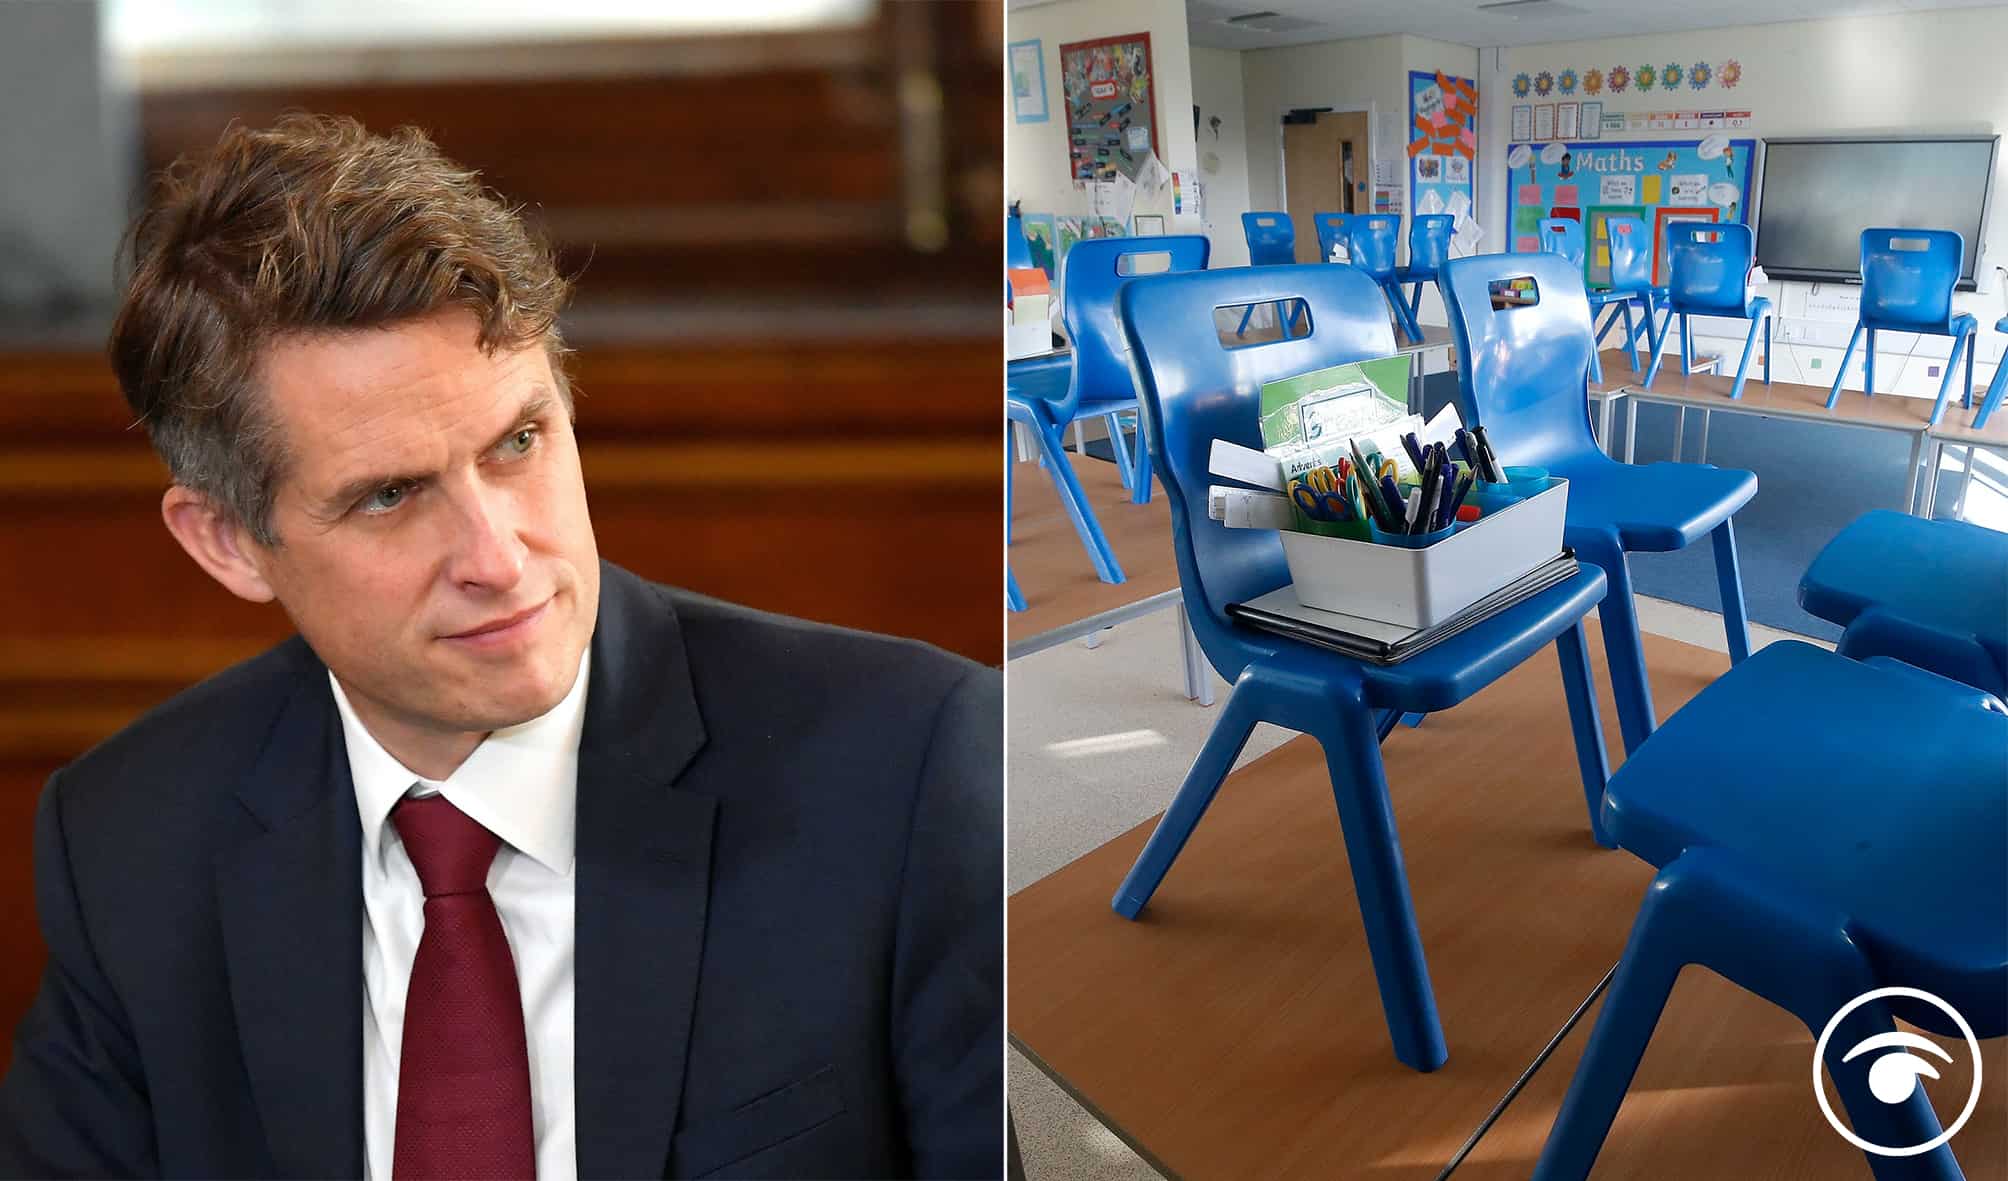 ‘Legal right to protection’ – Leading union to tell staff of right not to return to classrooms